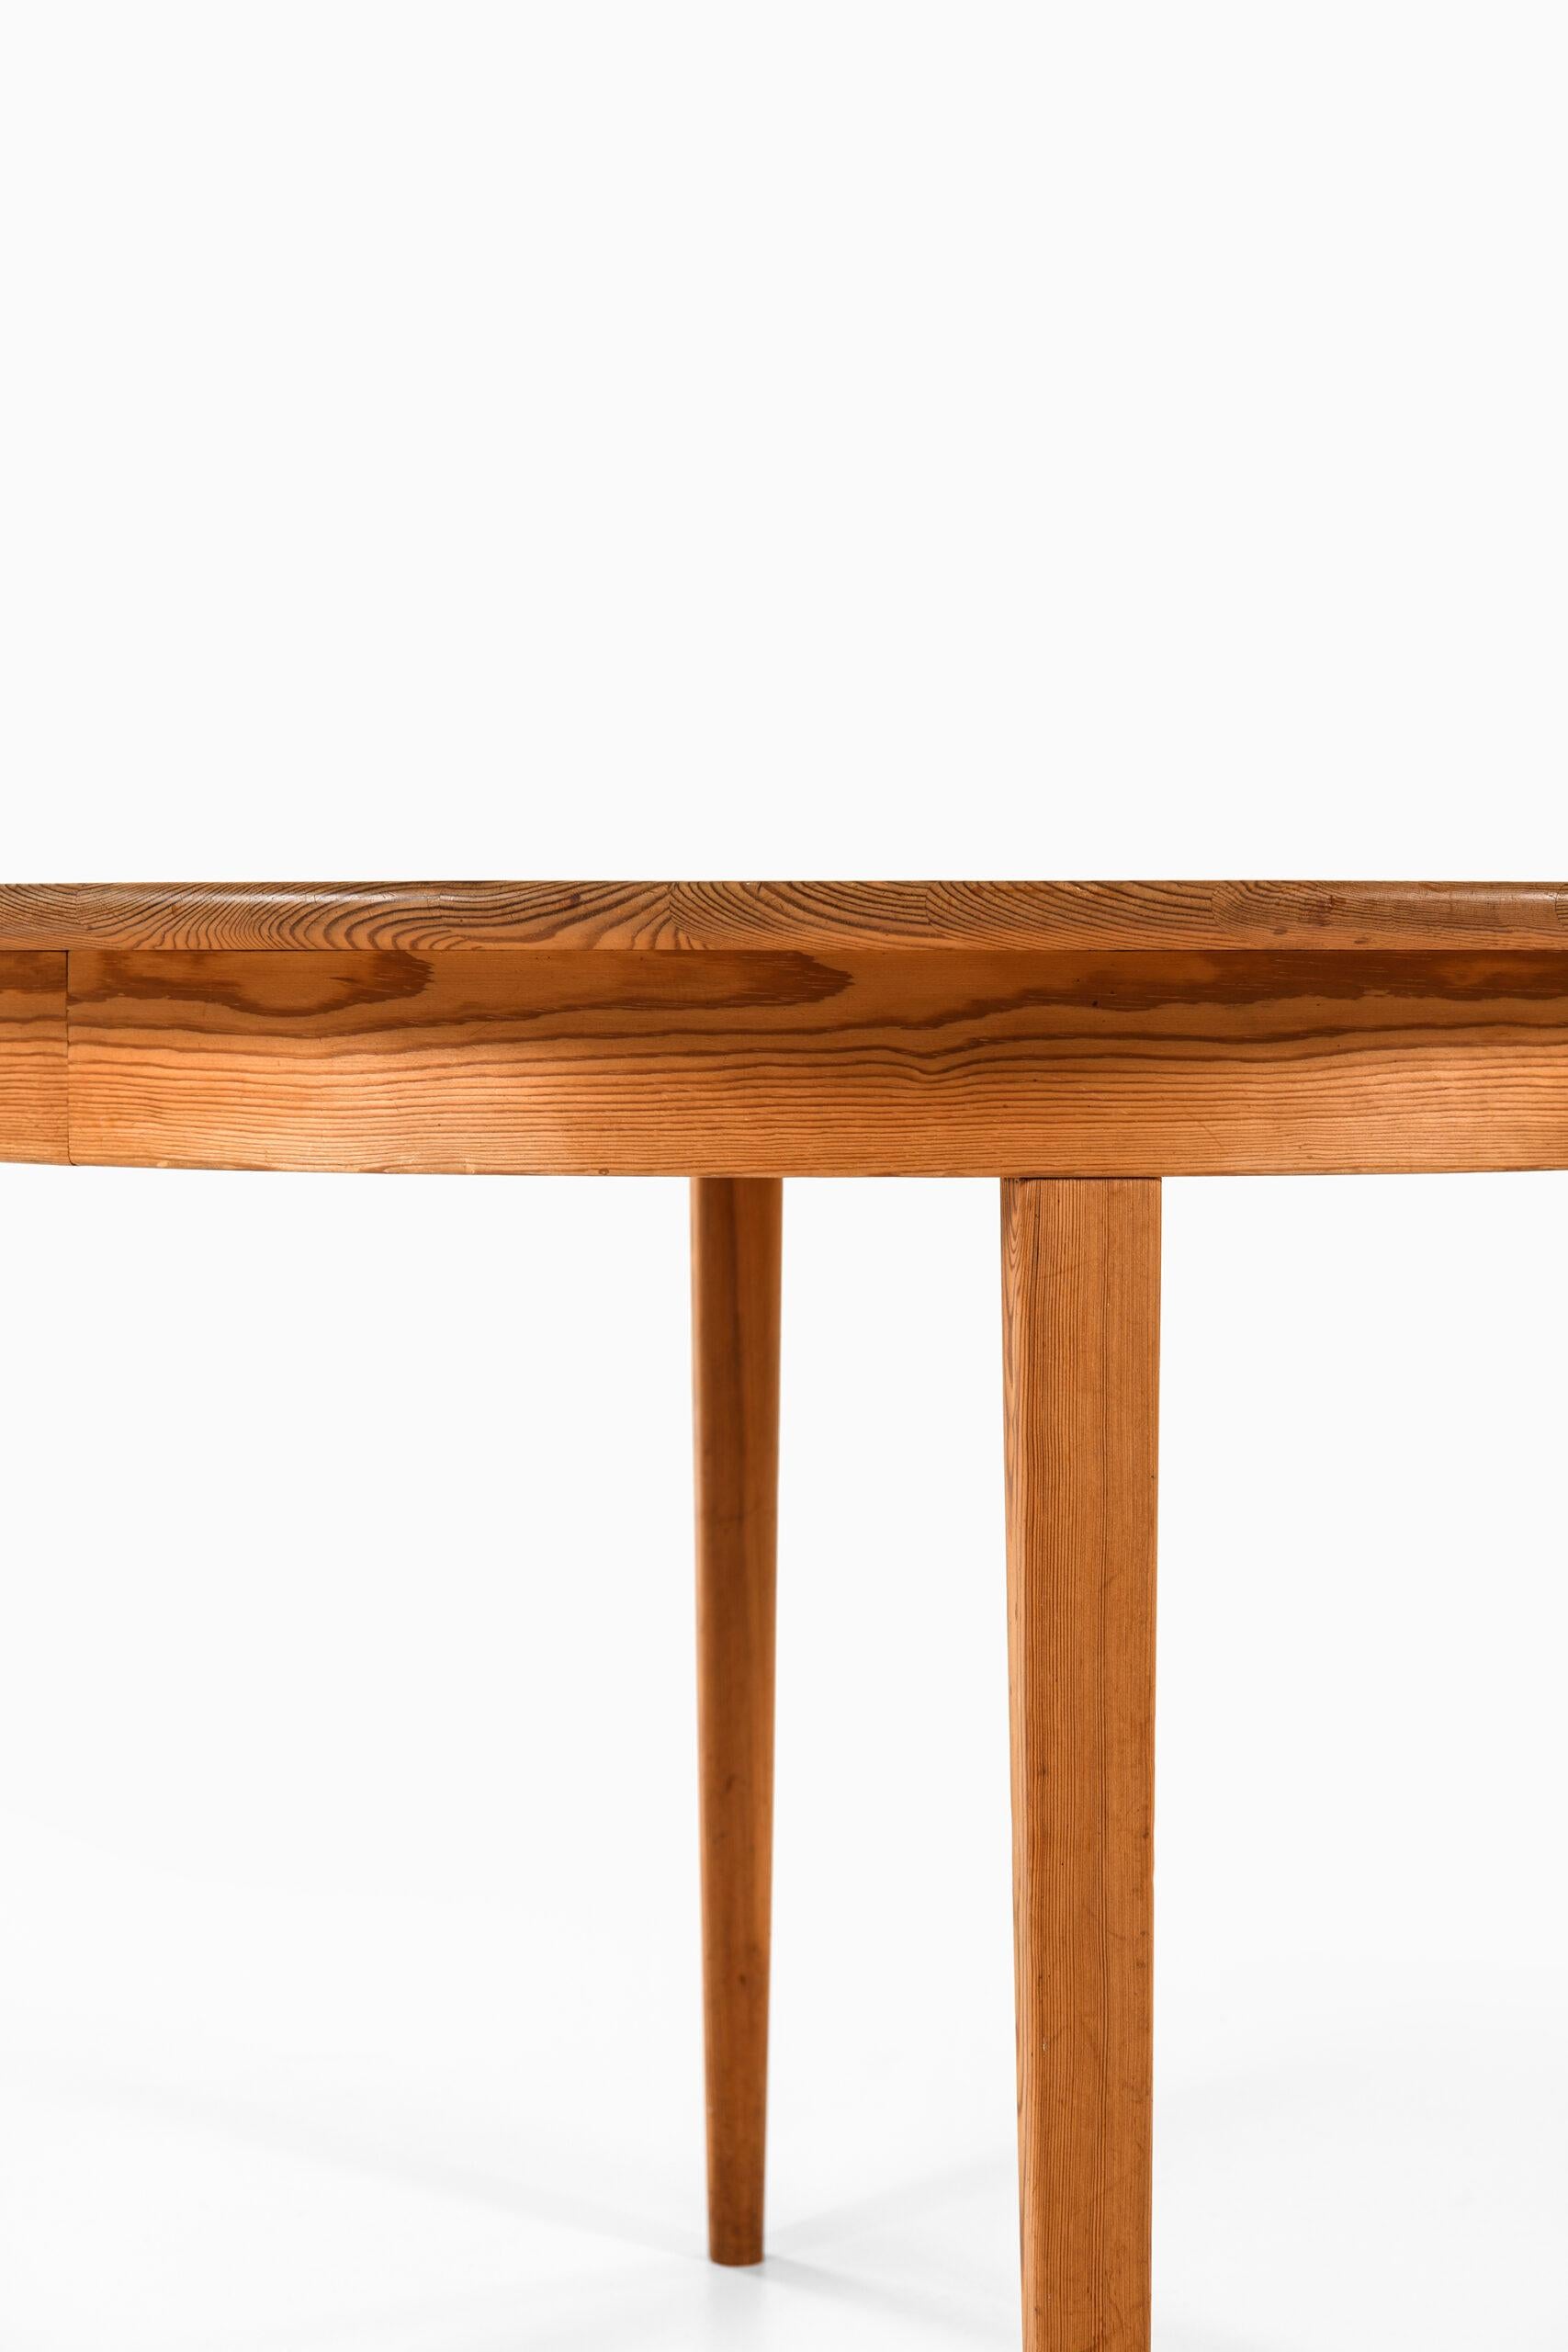 Rare dining table designed by Carl Malmsten. Produced in Sweden.
Width: 110 ( 220 ) cm.